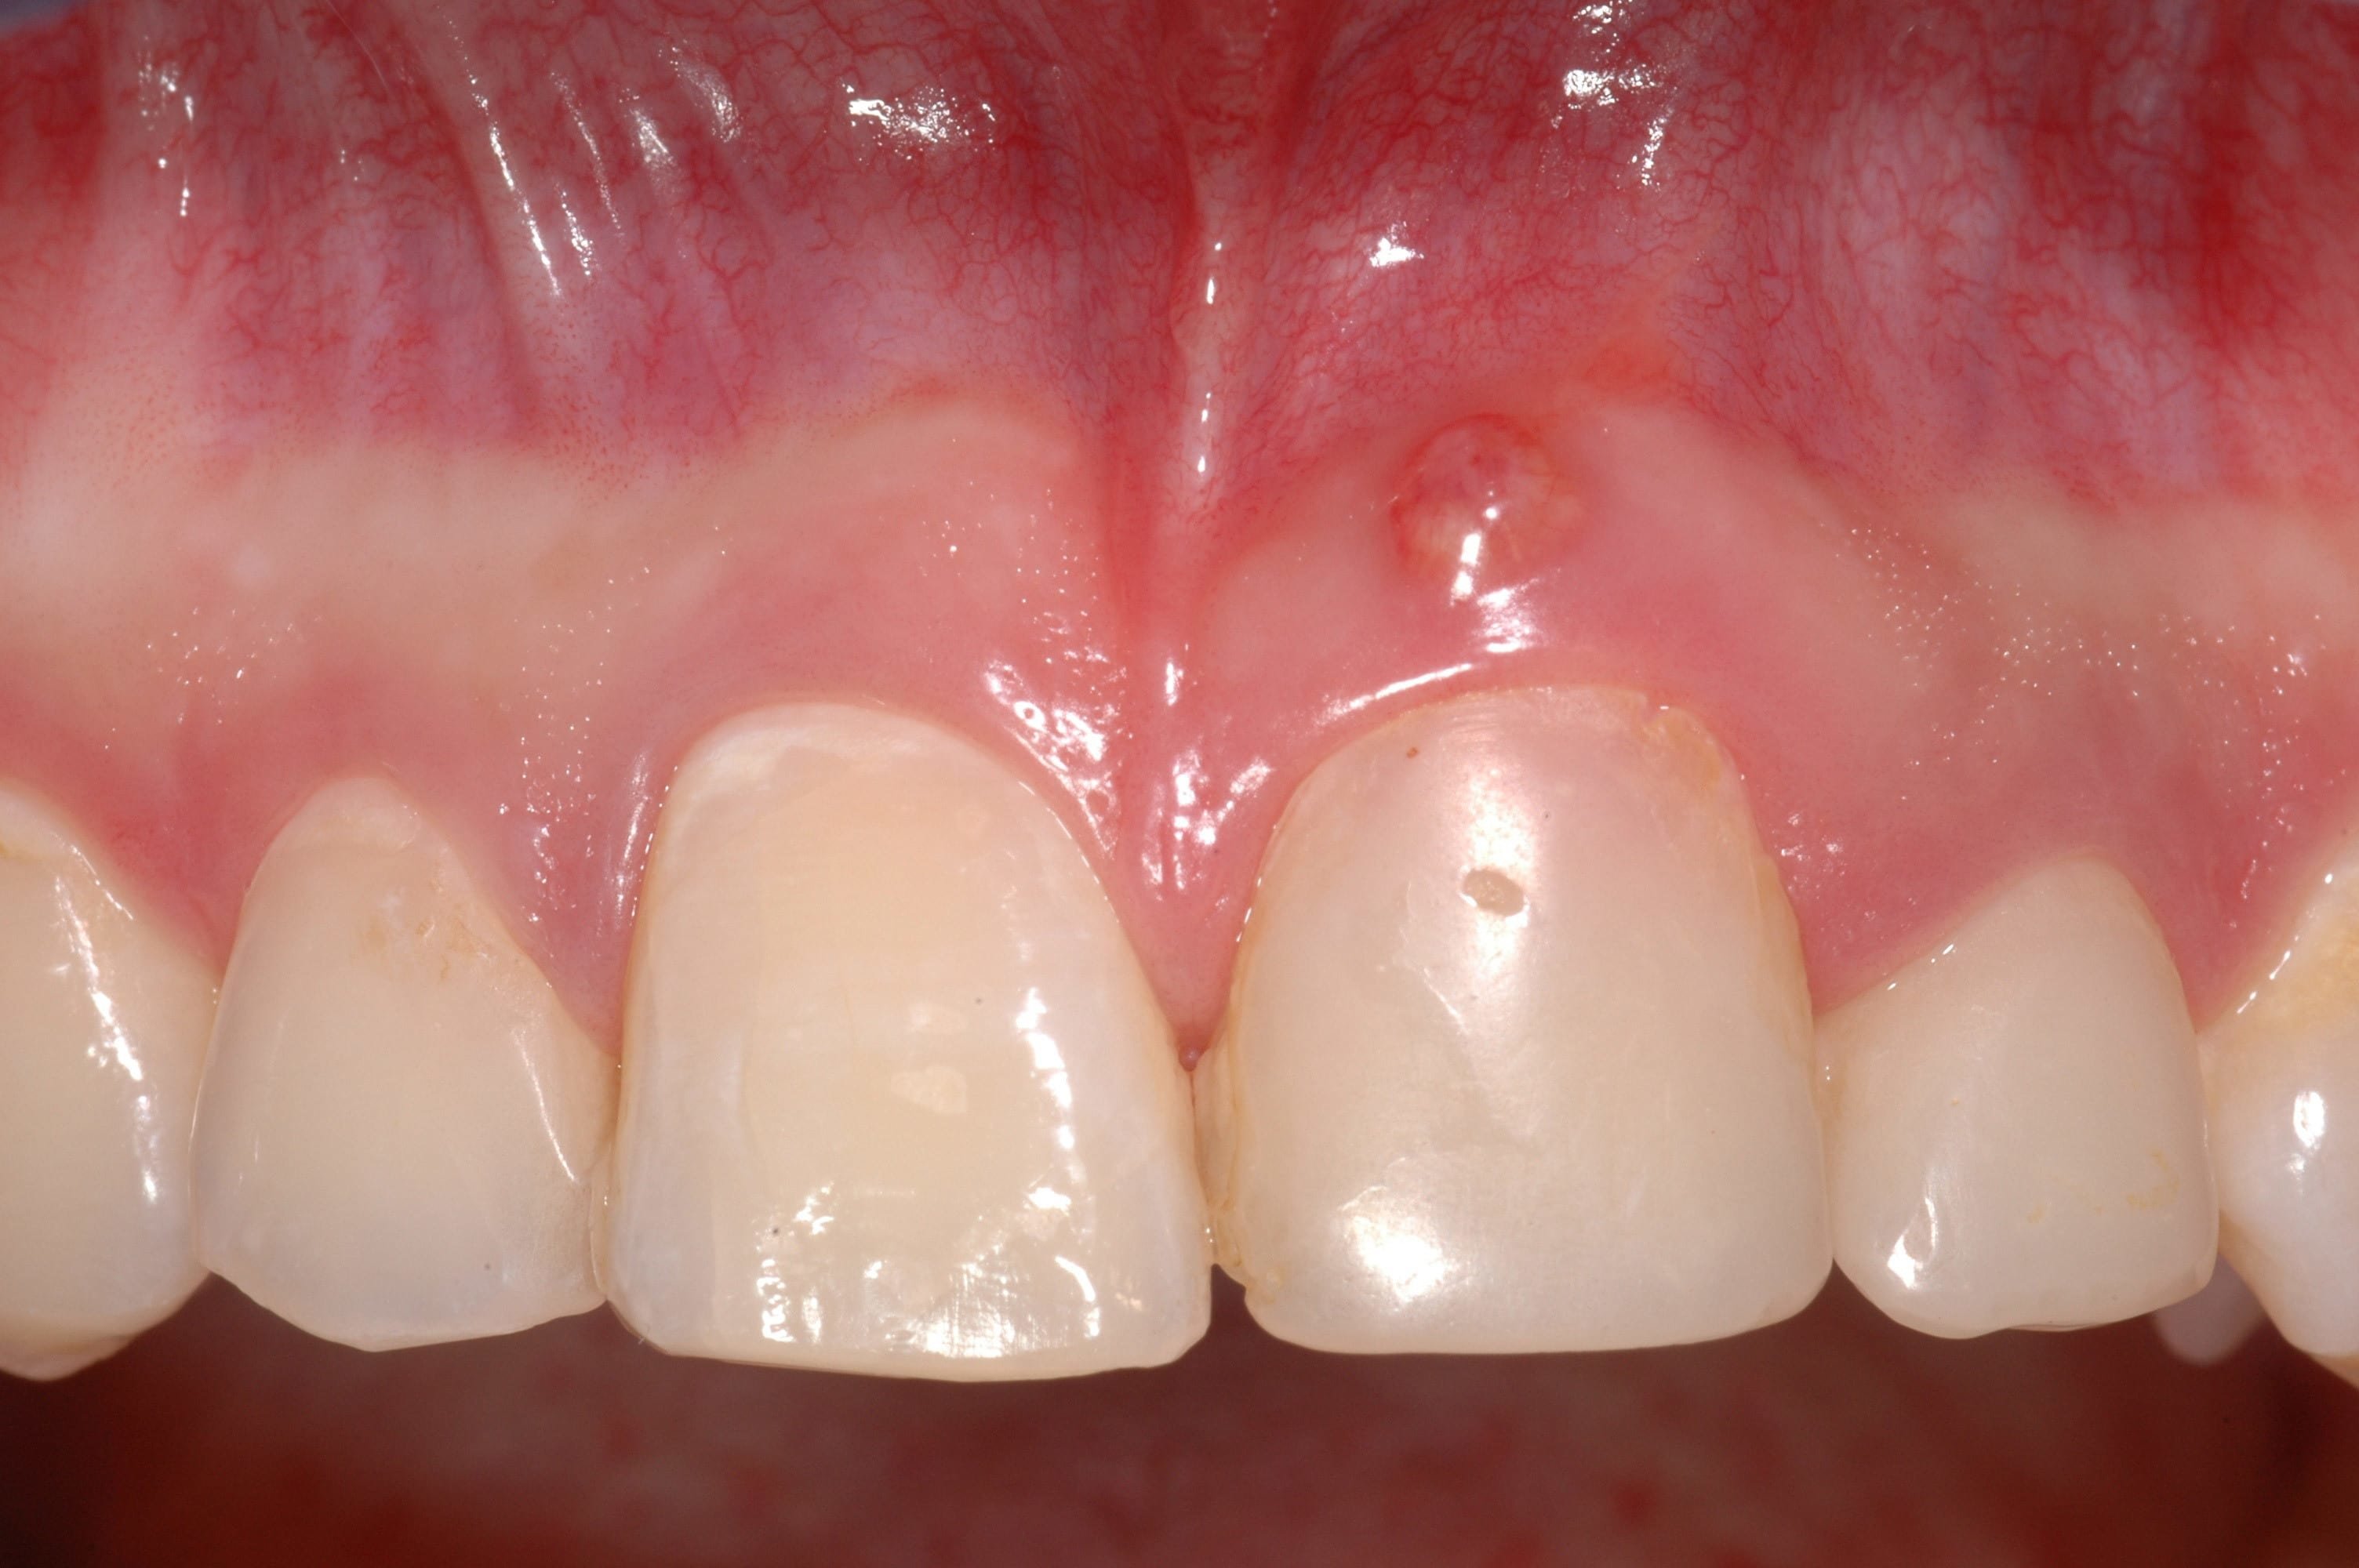 Figure 1: Initial clinical presentation of a 19-year old female patient referred for dental implant treatment planning